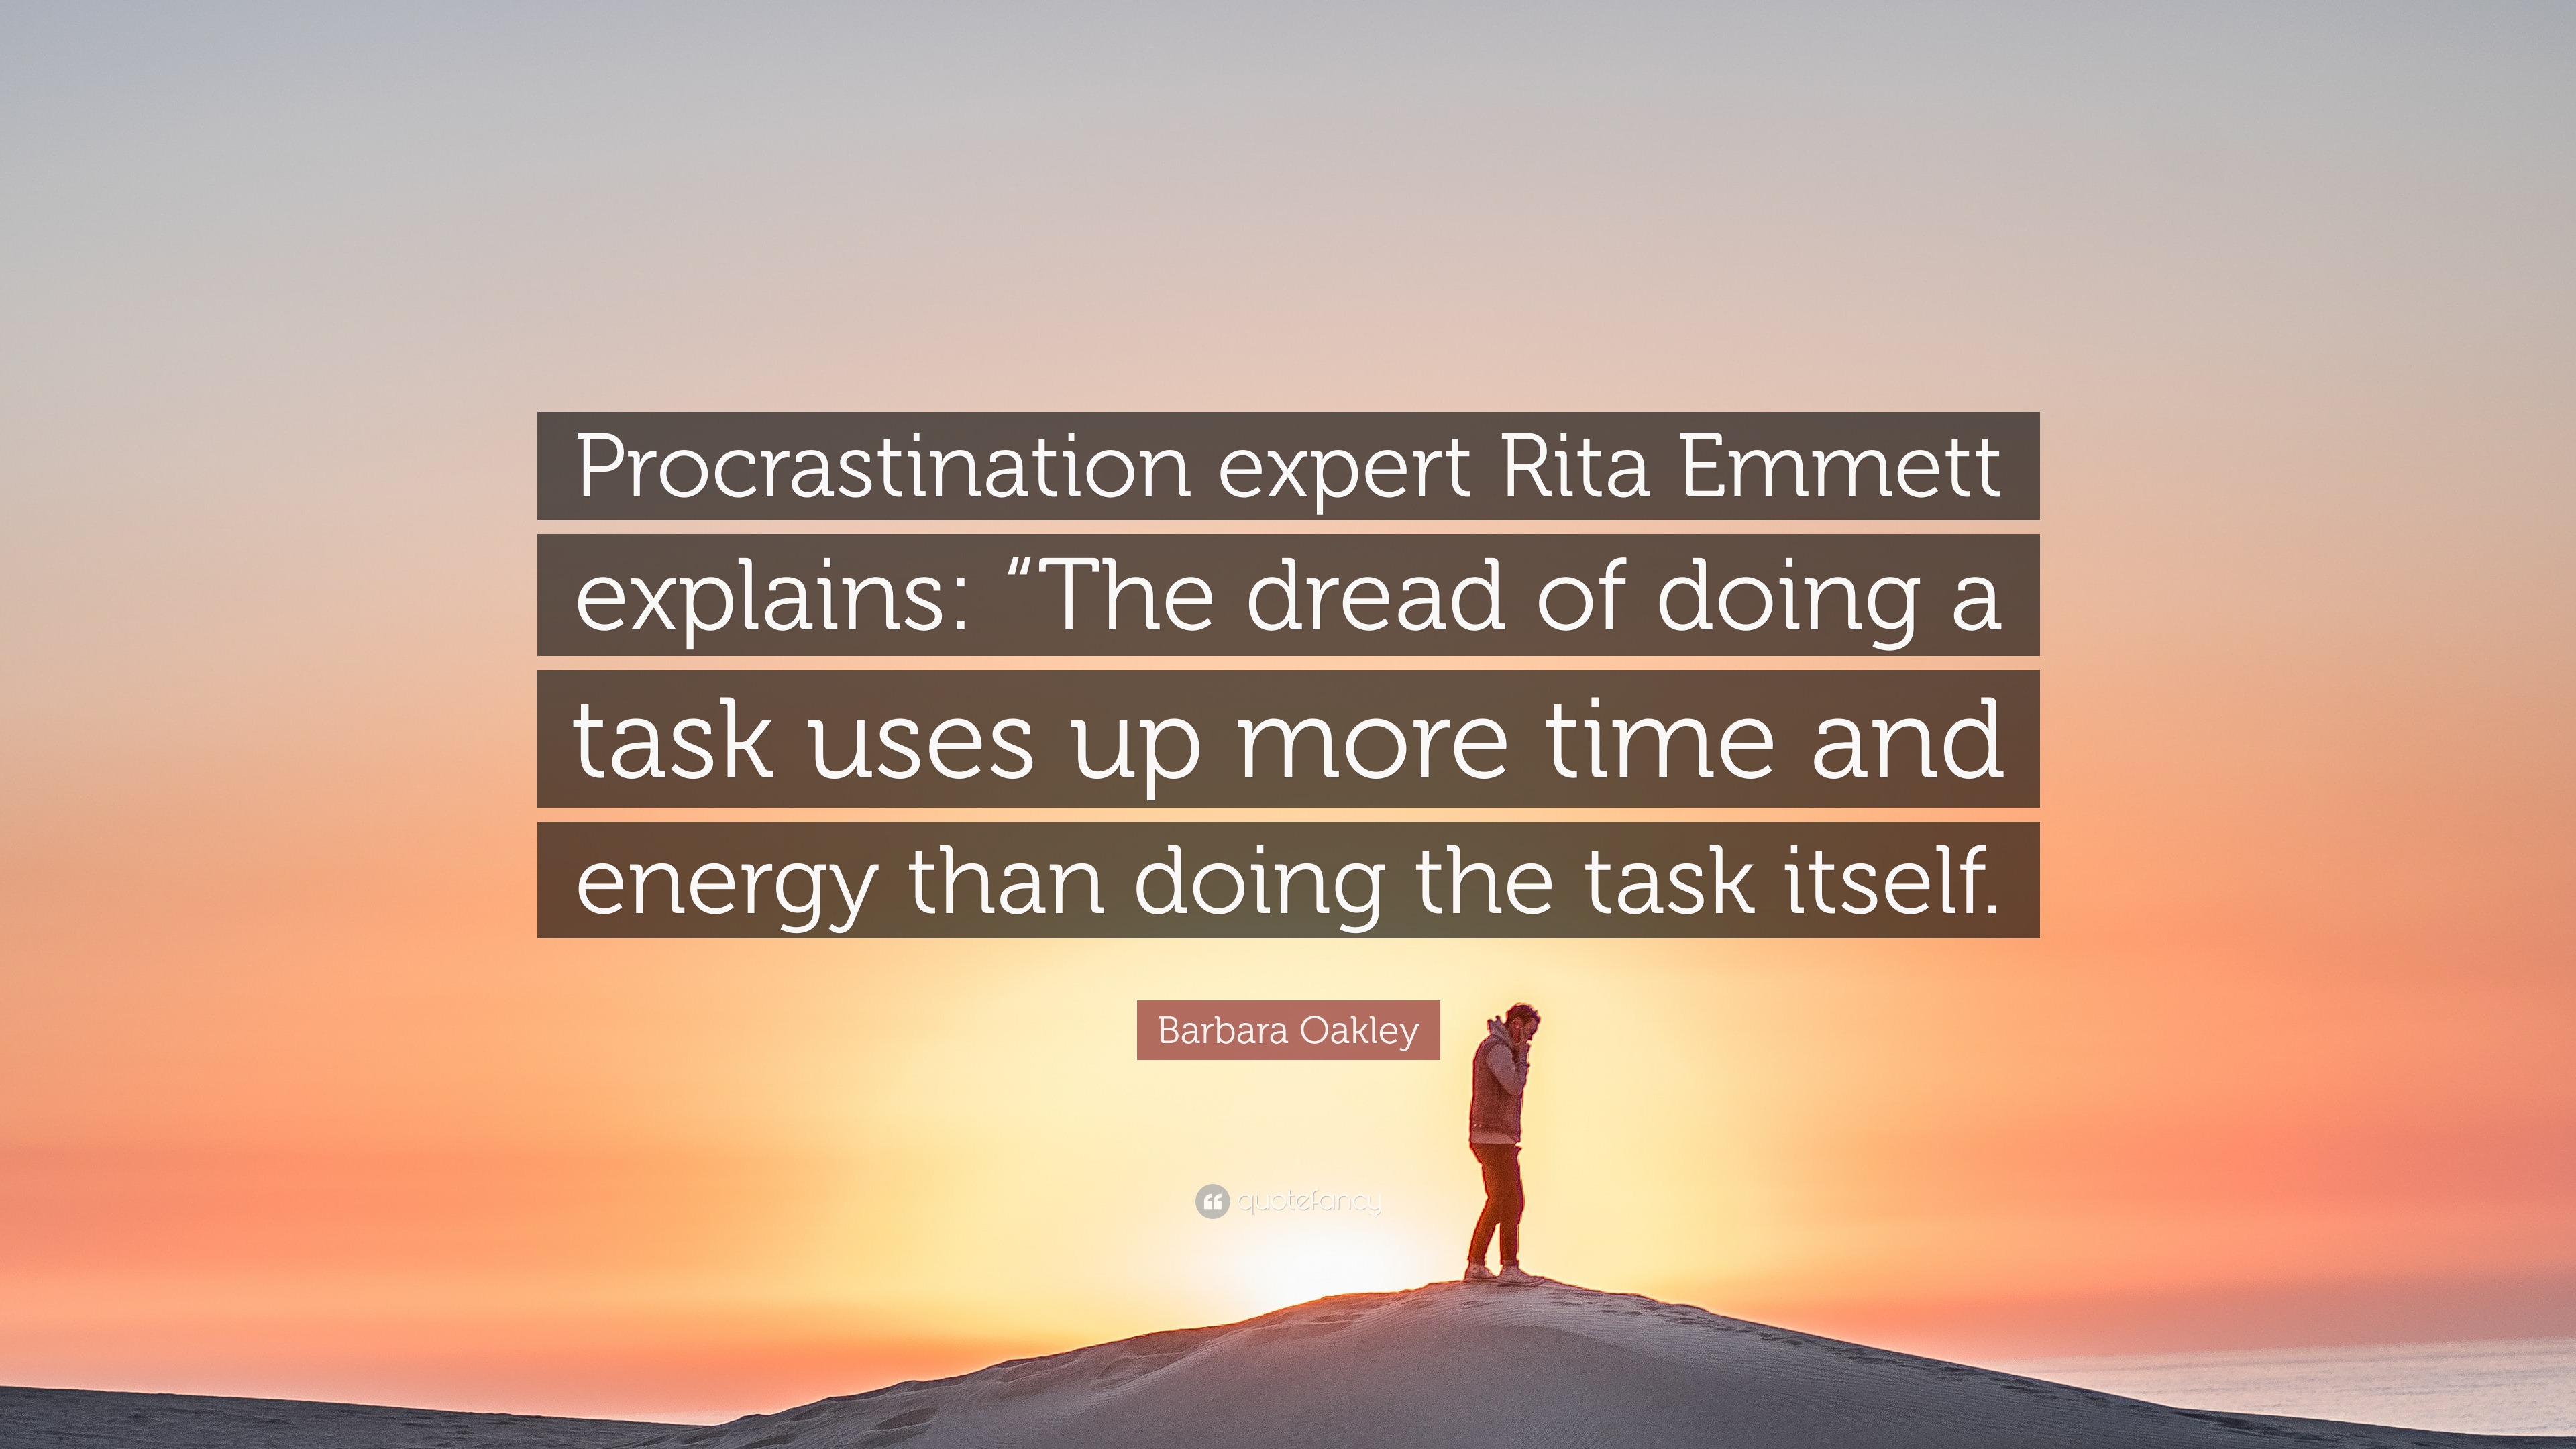 Barbara Oakley Quote: “Procrastination expert Rita Emmett explains: “The  dread of doing a task uses up more time and energy than doing the task...”